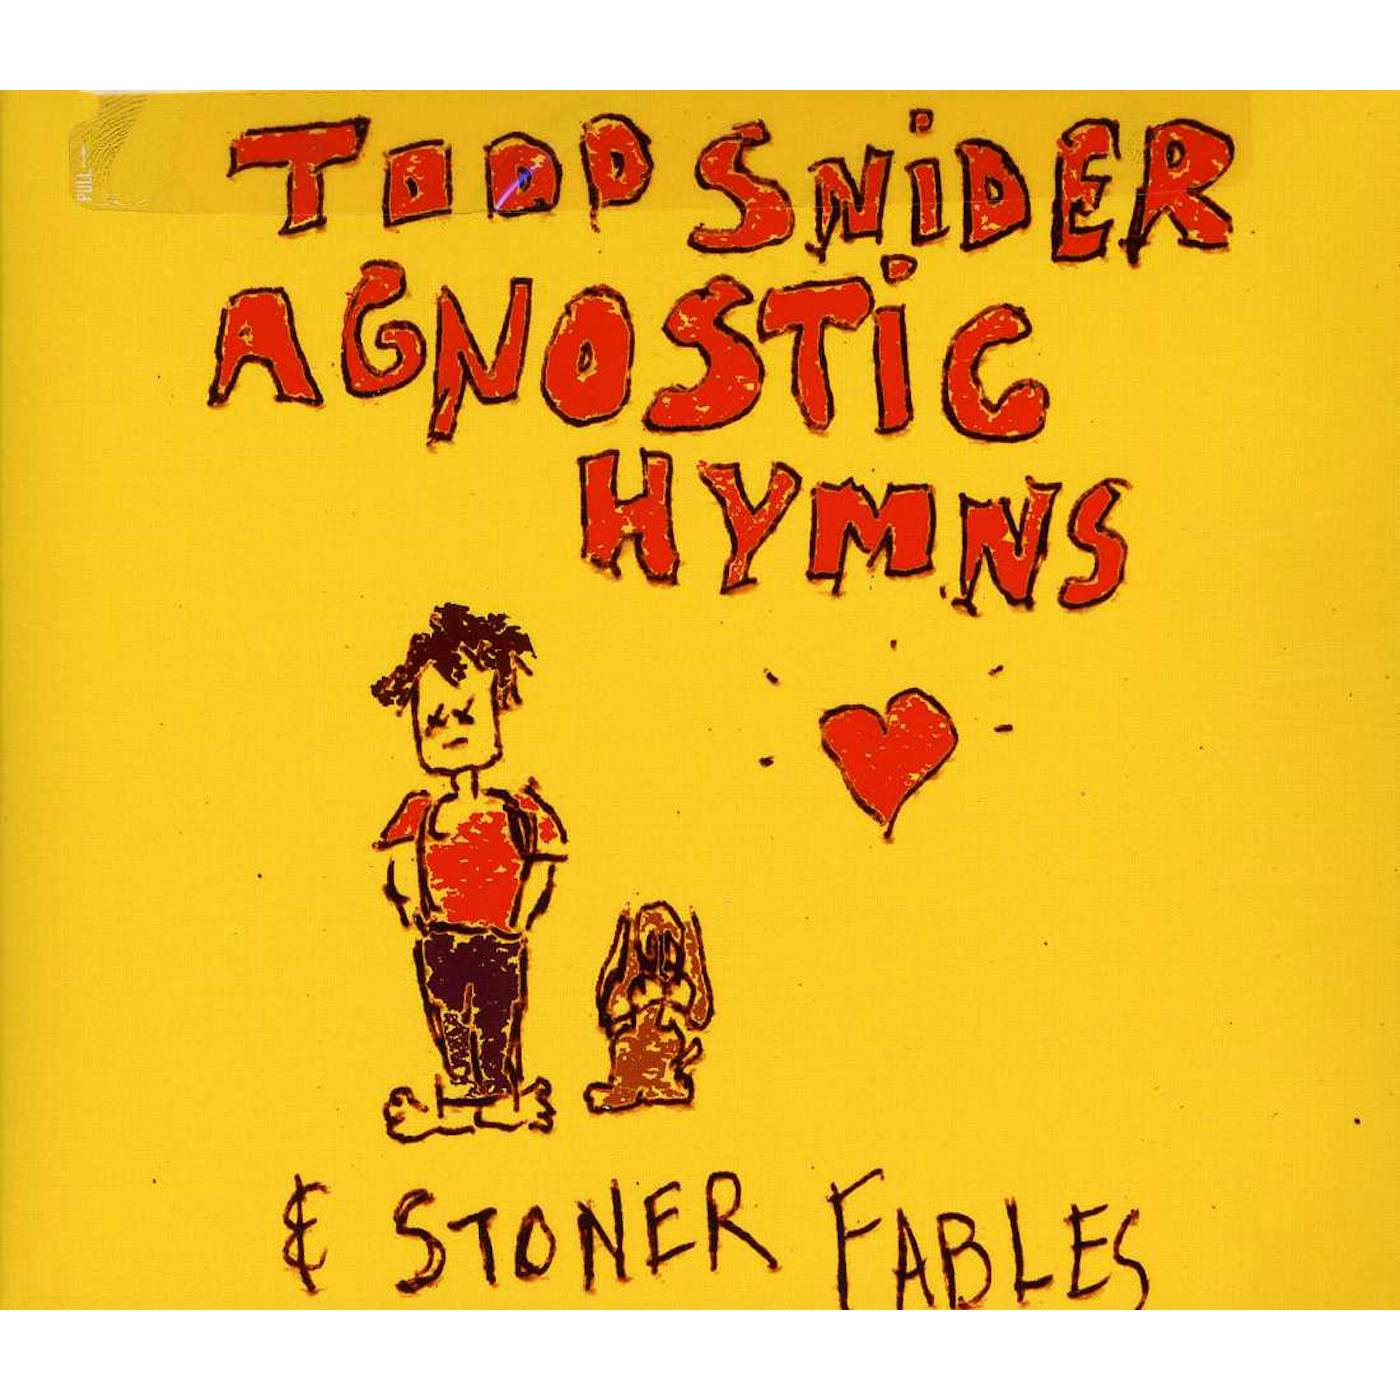 Todd Snider AGNOSTIC HYMNS & STONER FABLES CD